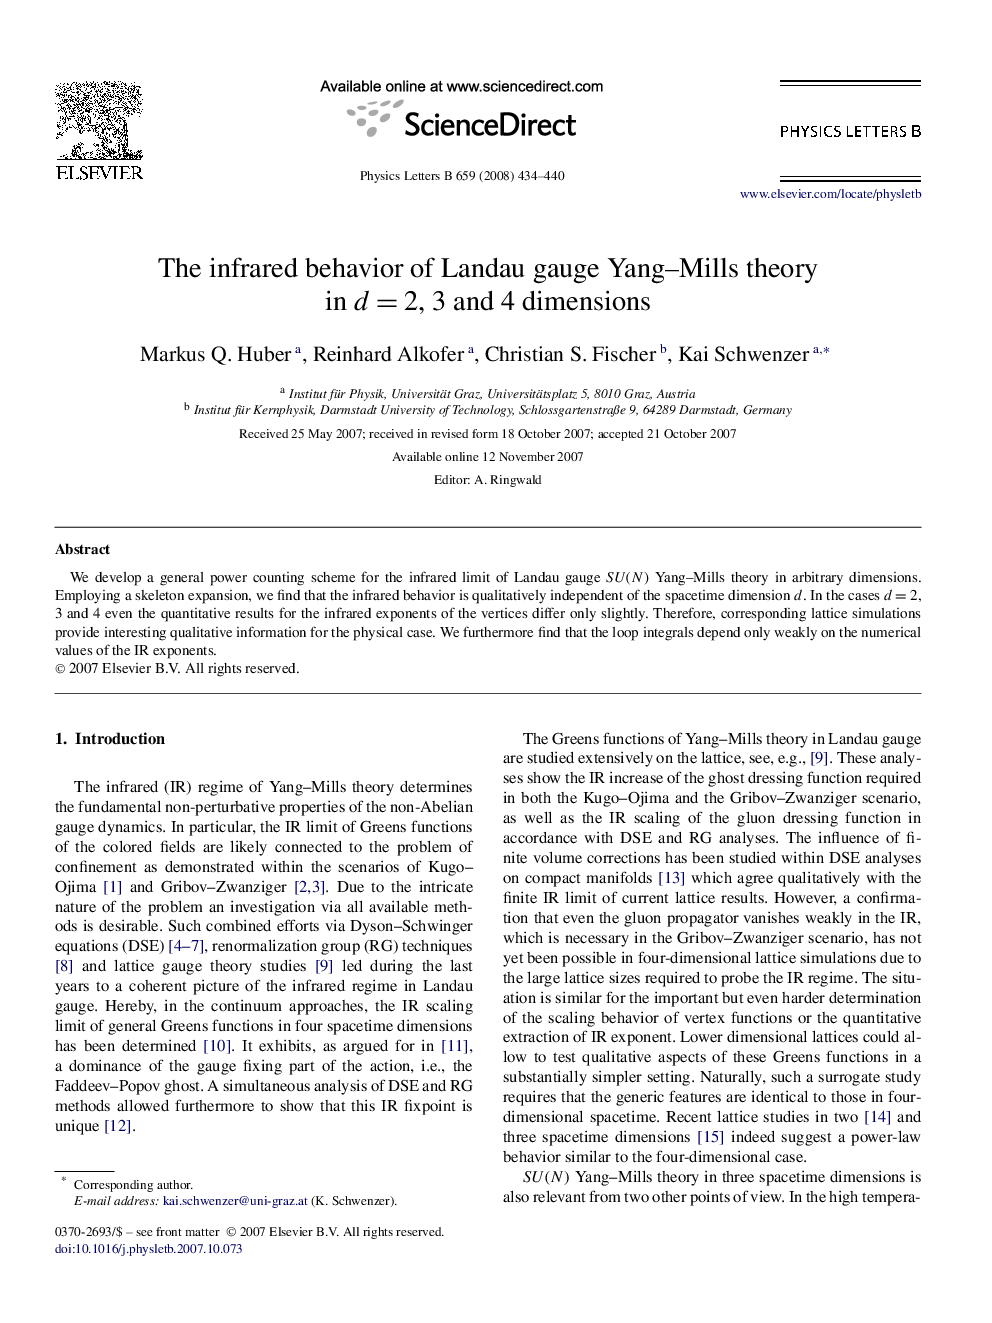 The infrared behavior of Landau gauge Yang-Mills theory in d=2, 3 and 4 dimensions